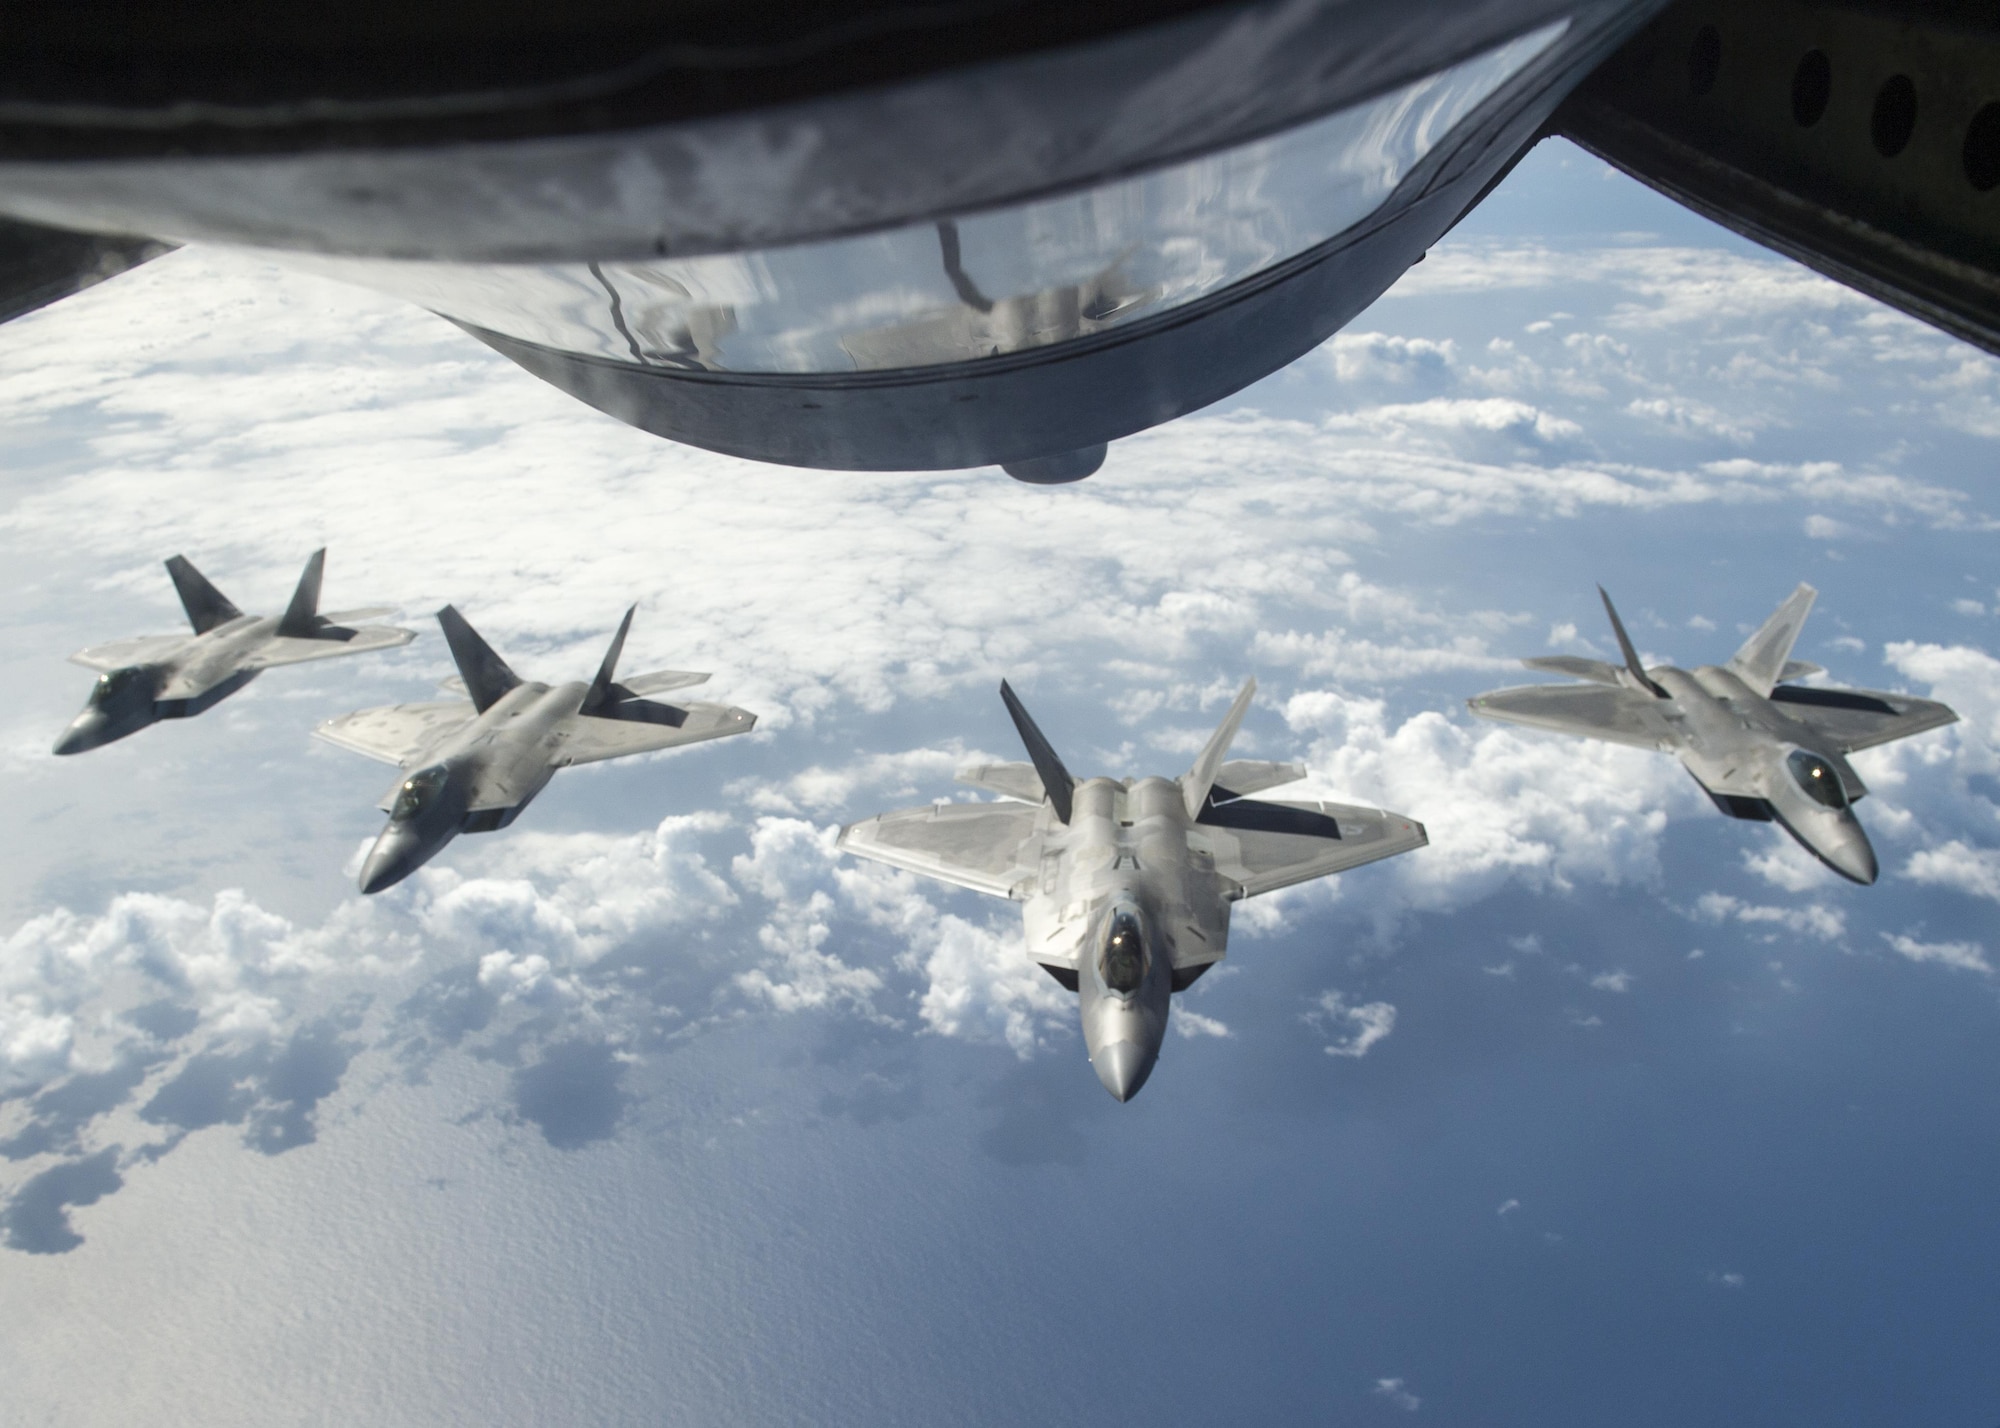 Four U.S. F-22 Raptors from the 199th Fighter Squadron and the 19th Fighter Squadron await refueling from a KC-135R Stratotanker operated by 465th Air Refueling Squadron from Tinker Air Force Base, Oklahoma, during Rim of the Pacific 2016 over Joint Base Pearl Harbor-Hickam, Hawaii, July 26, 2016. (U.S. Navy photo by Mass Communication Specialist 2nd Class Gregory A. Harden II)